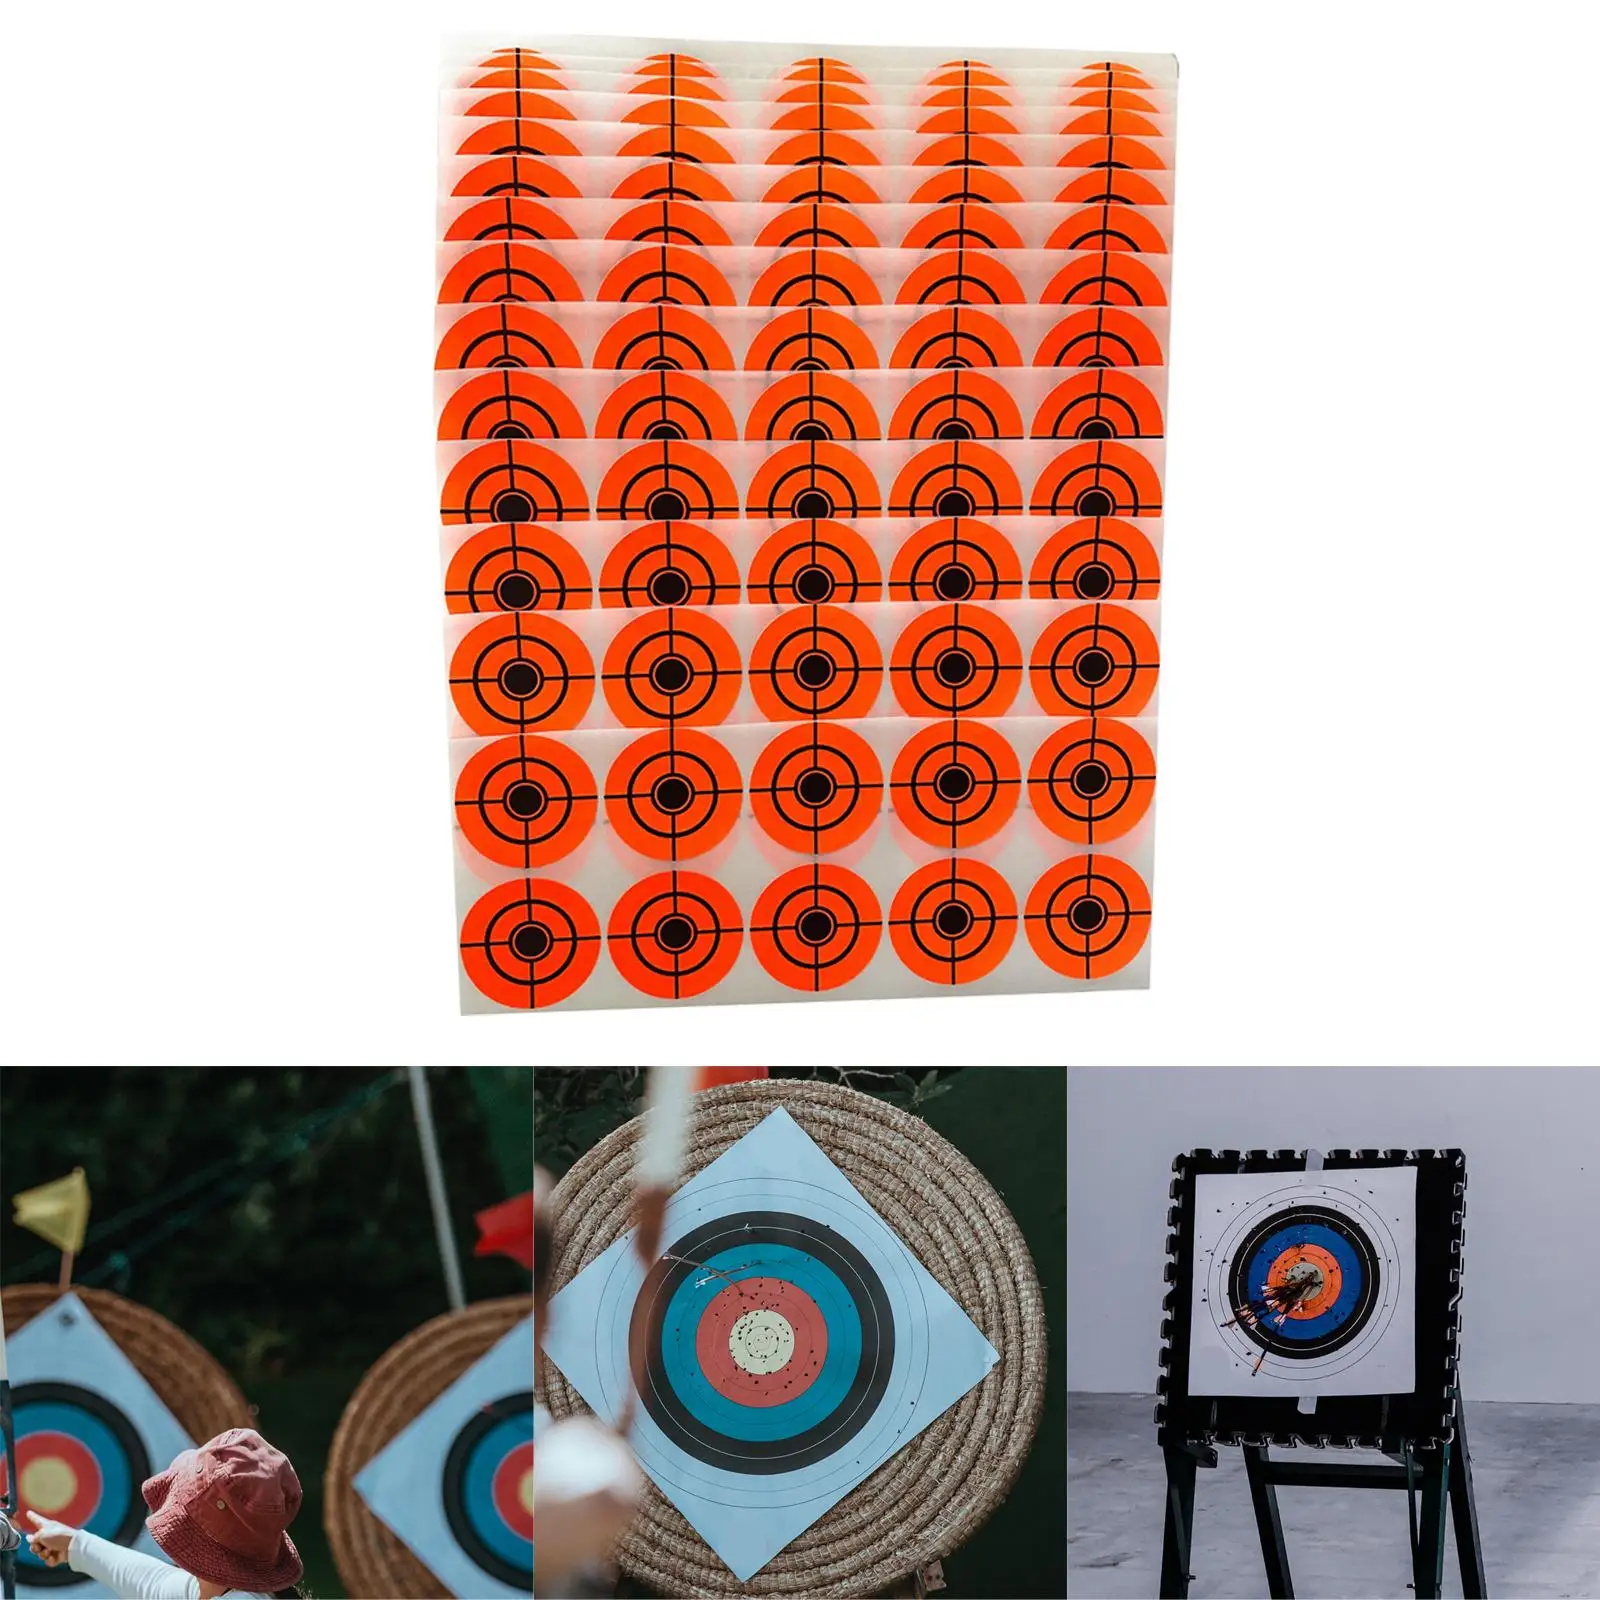 25 Sheets Target Stickers Shooting Practice Paper Stickers 1.57inch Outdoor Round Targets Reactive Target Accessories Training